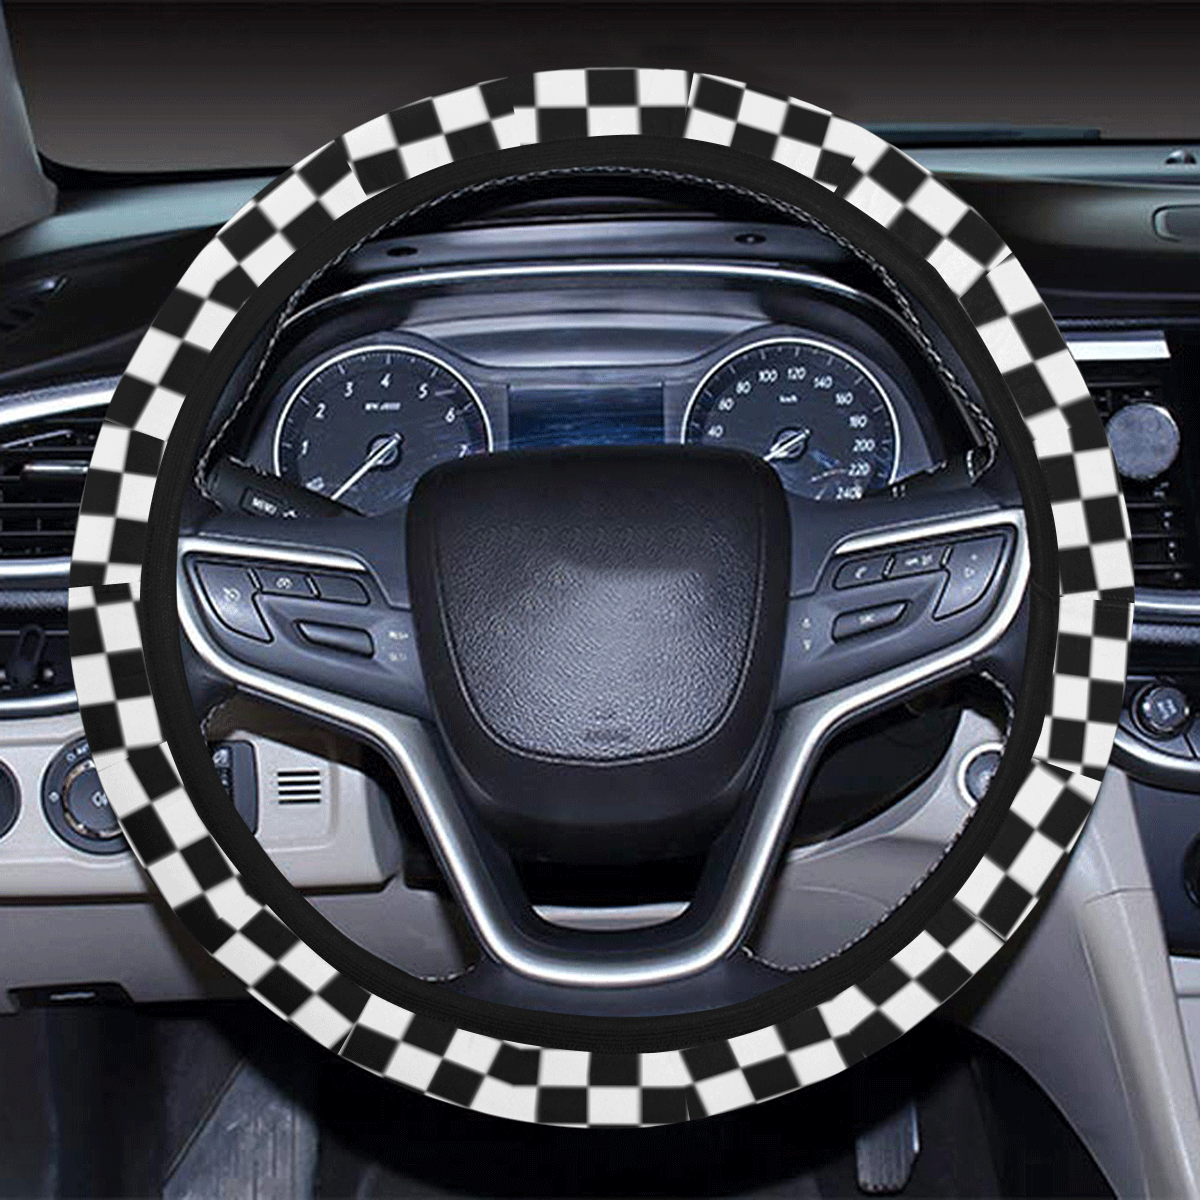 Checkerboard Black And White Steering Wheel Cover with Elastic Edge